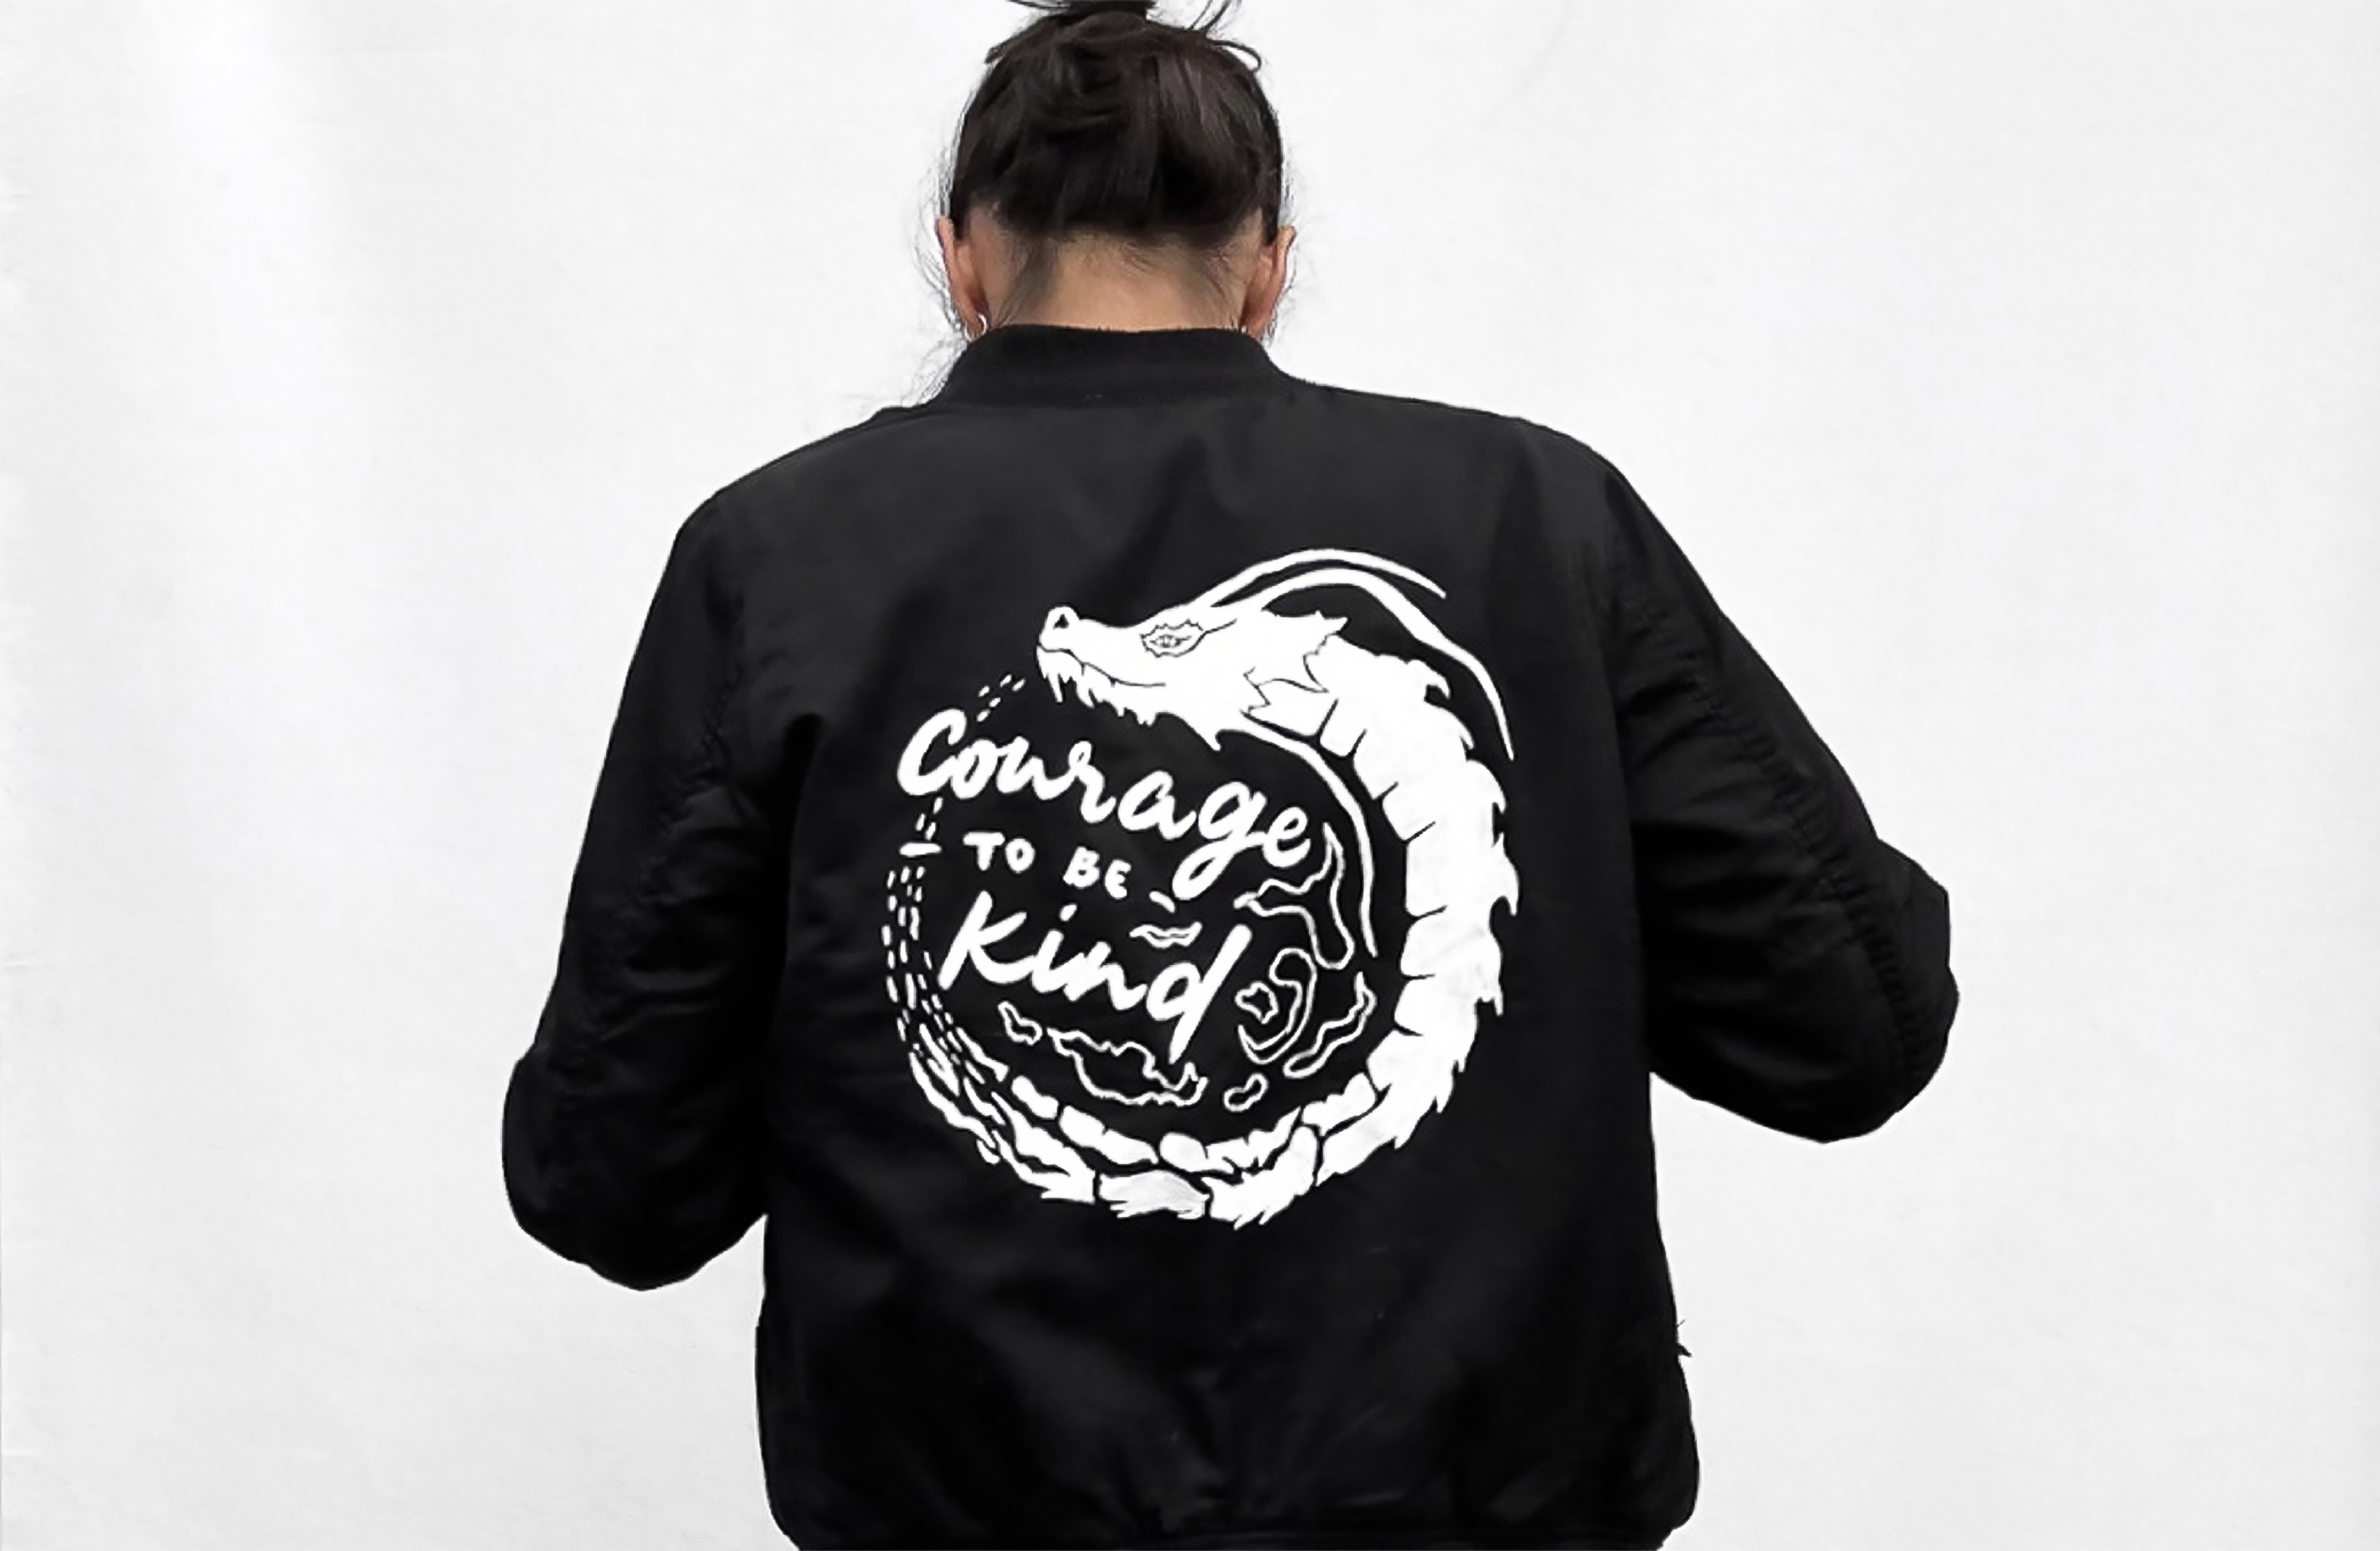 Hand-painted jacket with dragon on the back and sign "courage to be kind"